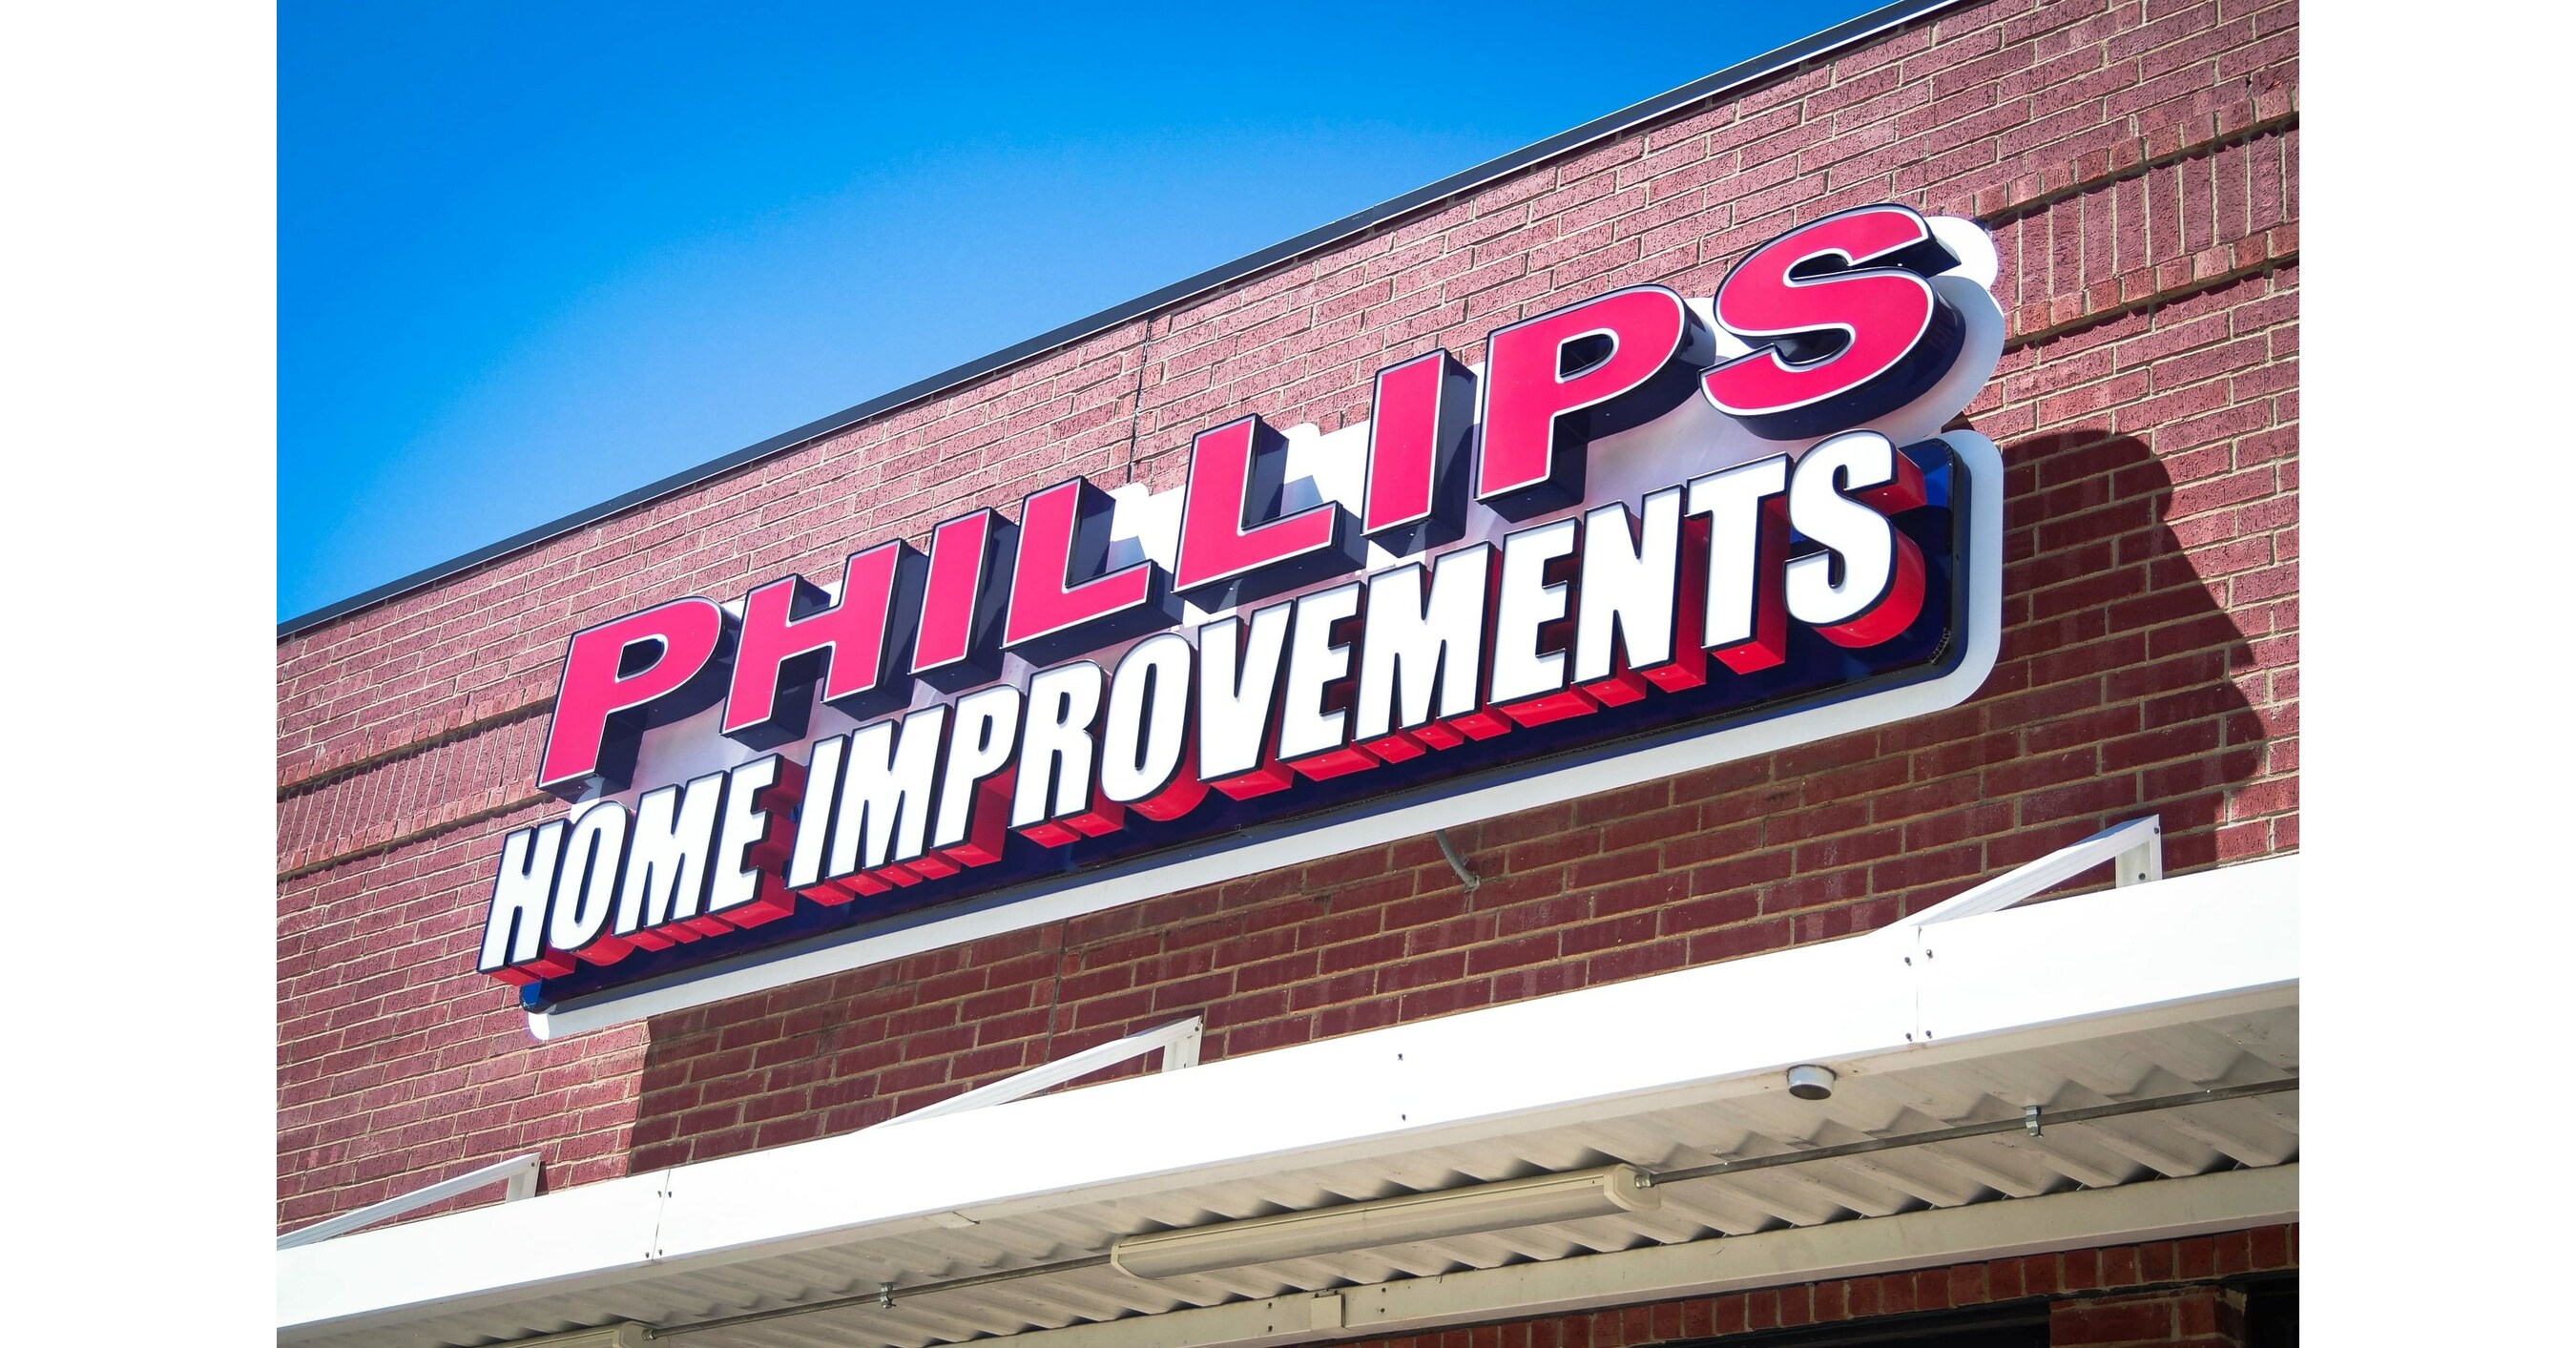 Home - Phillips Home Improvements